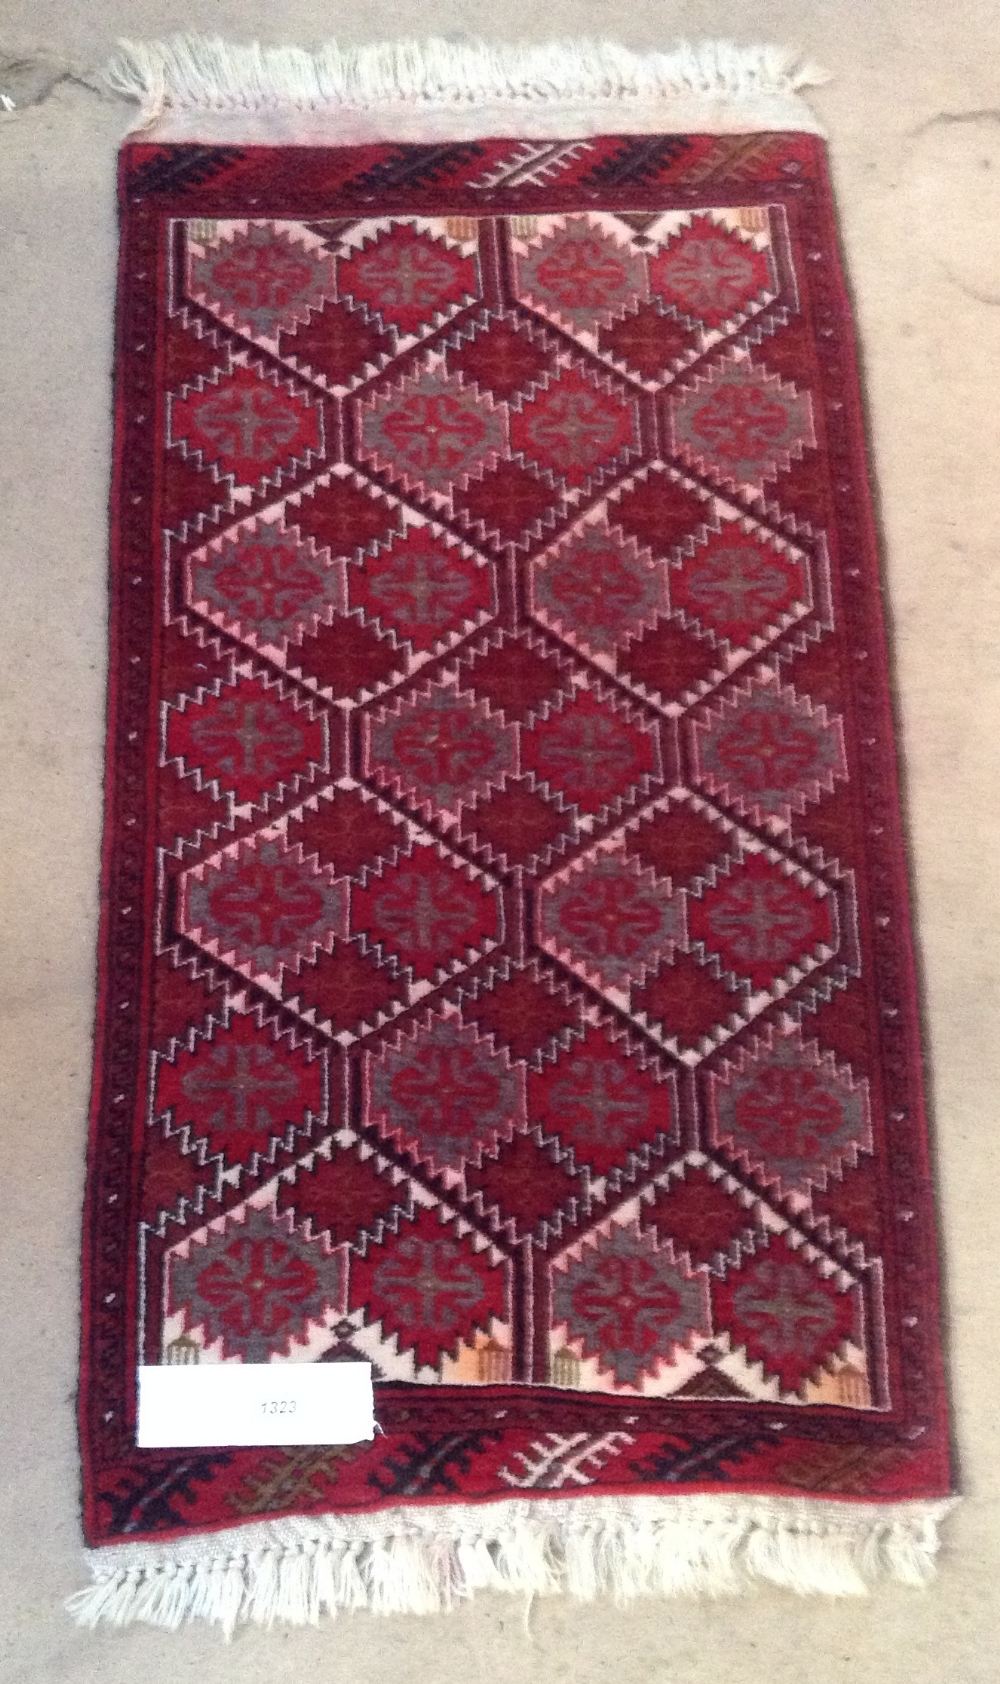 A small red ground Persian rug, 3'3" x 1'9".